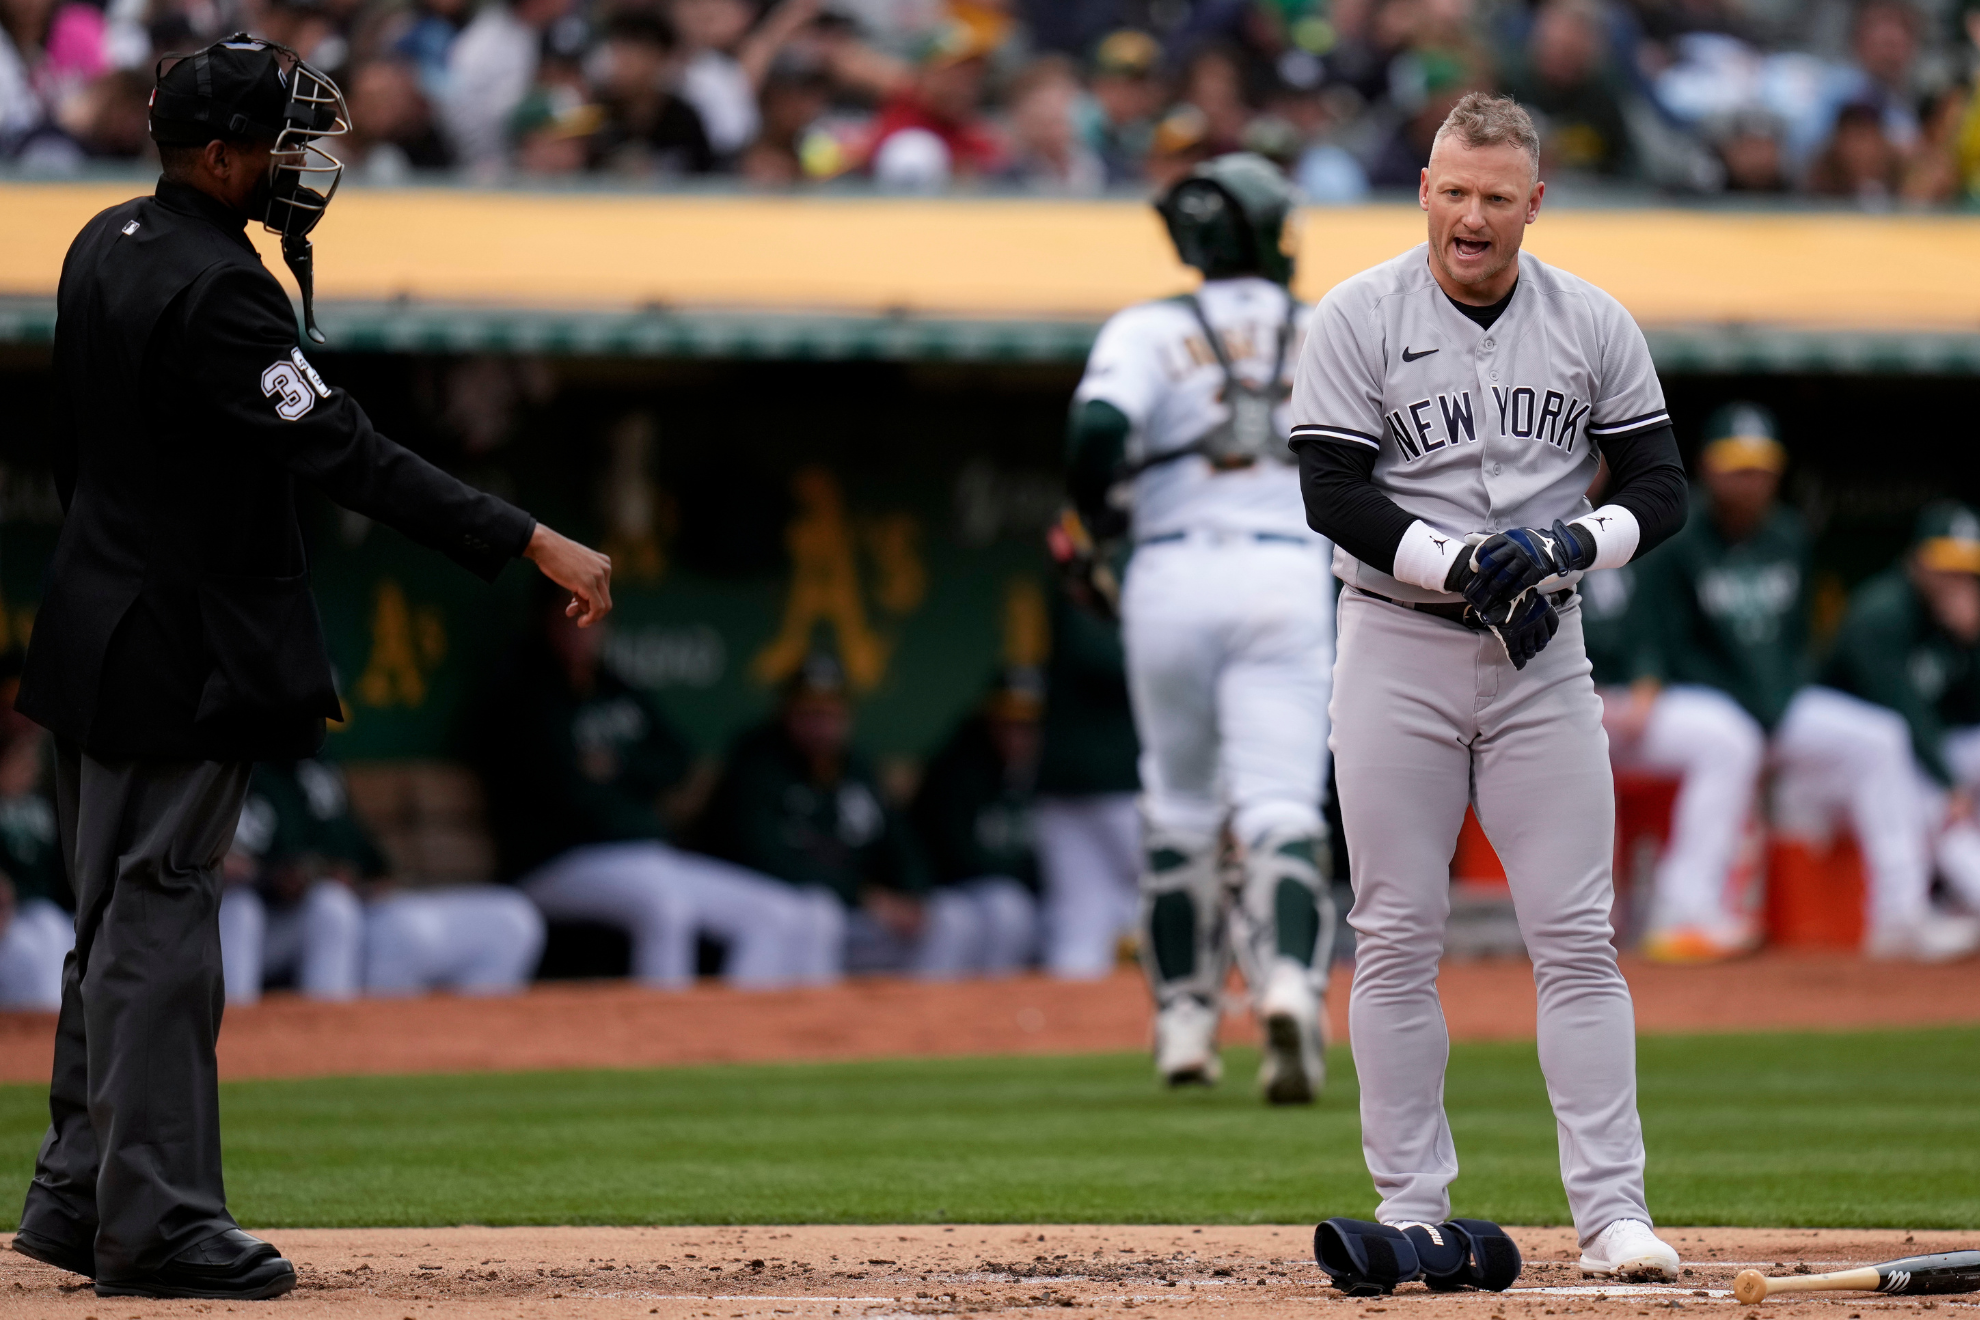 The Yankees threw in the towel on Donaldson, who hit .207 in 165 games with New York.